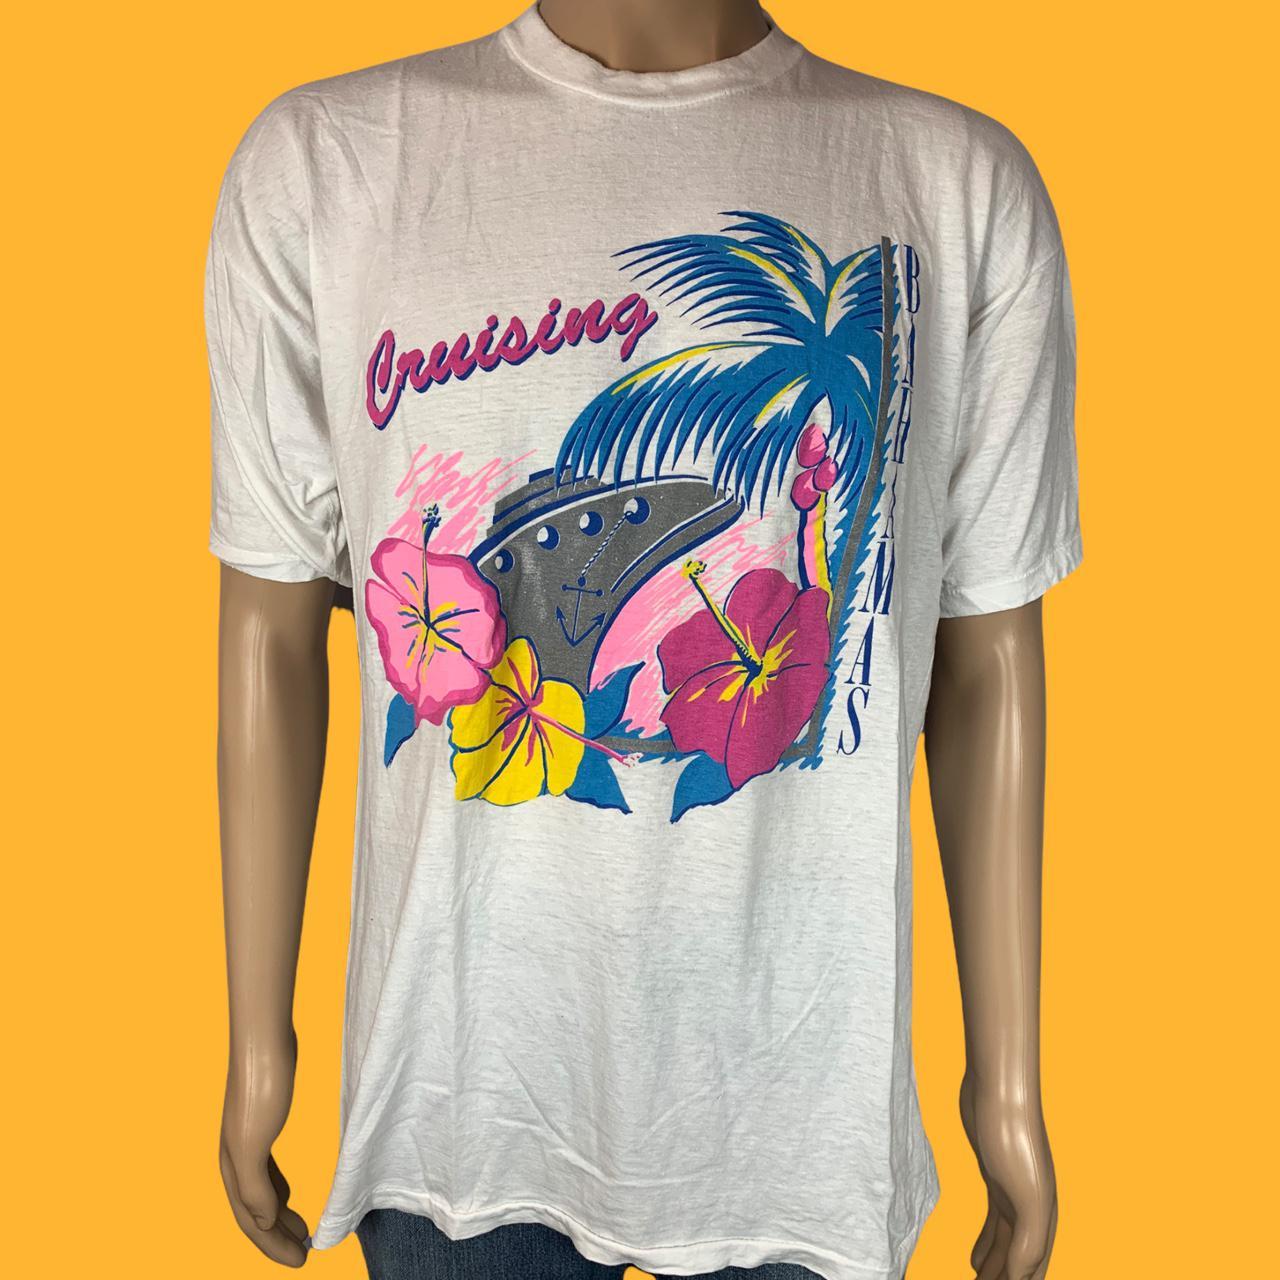 Vintage 90s tropical t shirt in good condition. Soft... - Depop